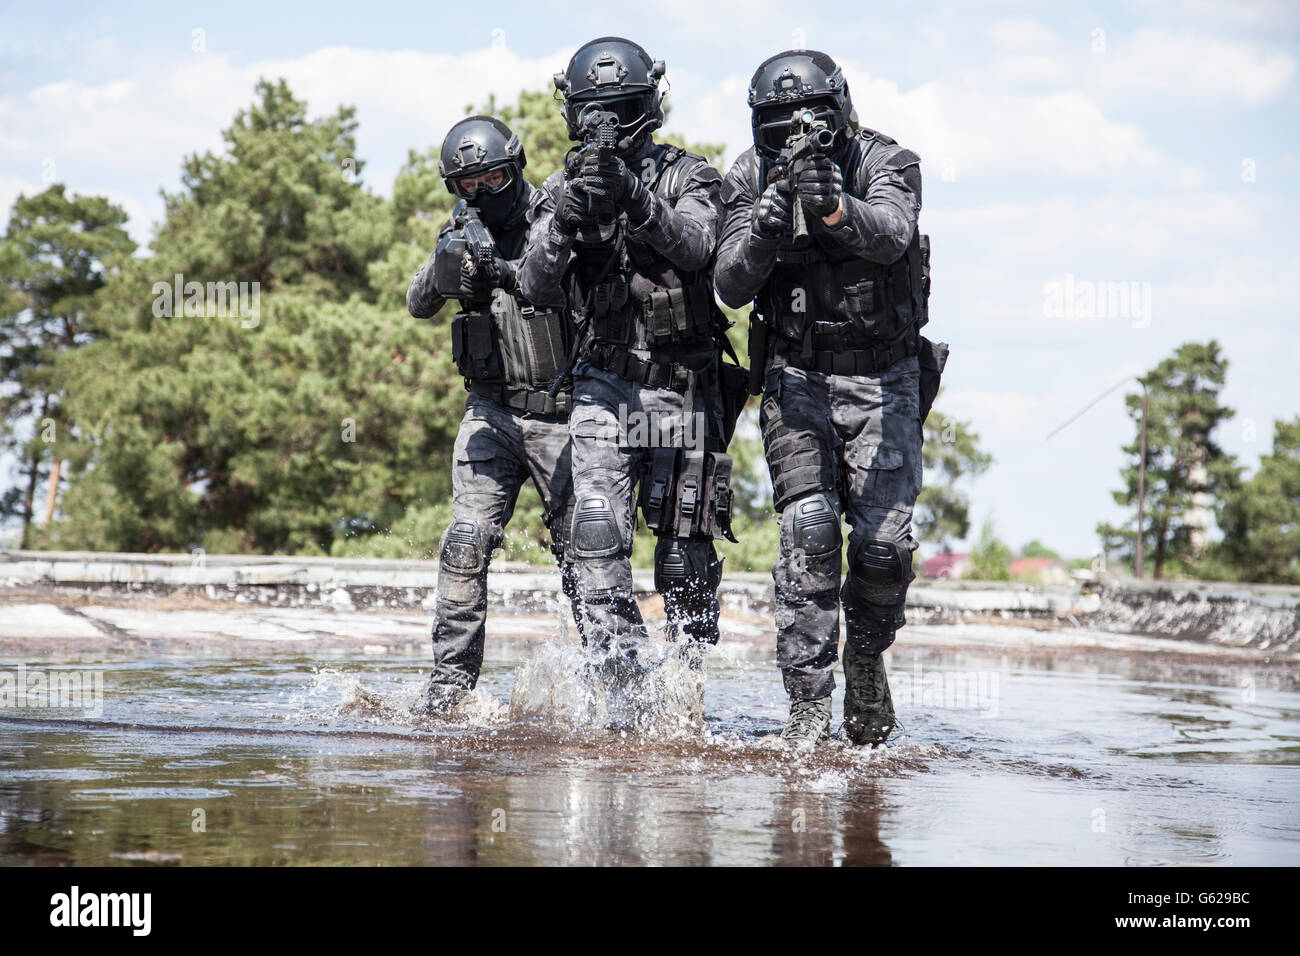 Spec ops police officers SWAT in the water Stock Photo